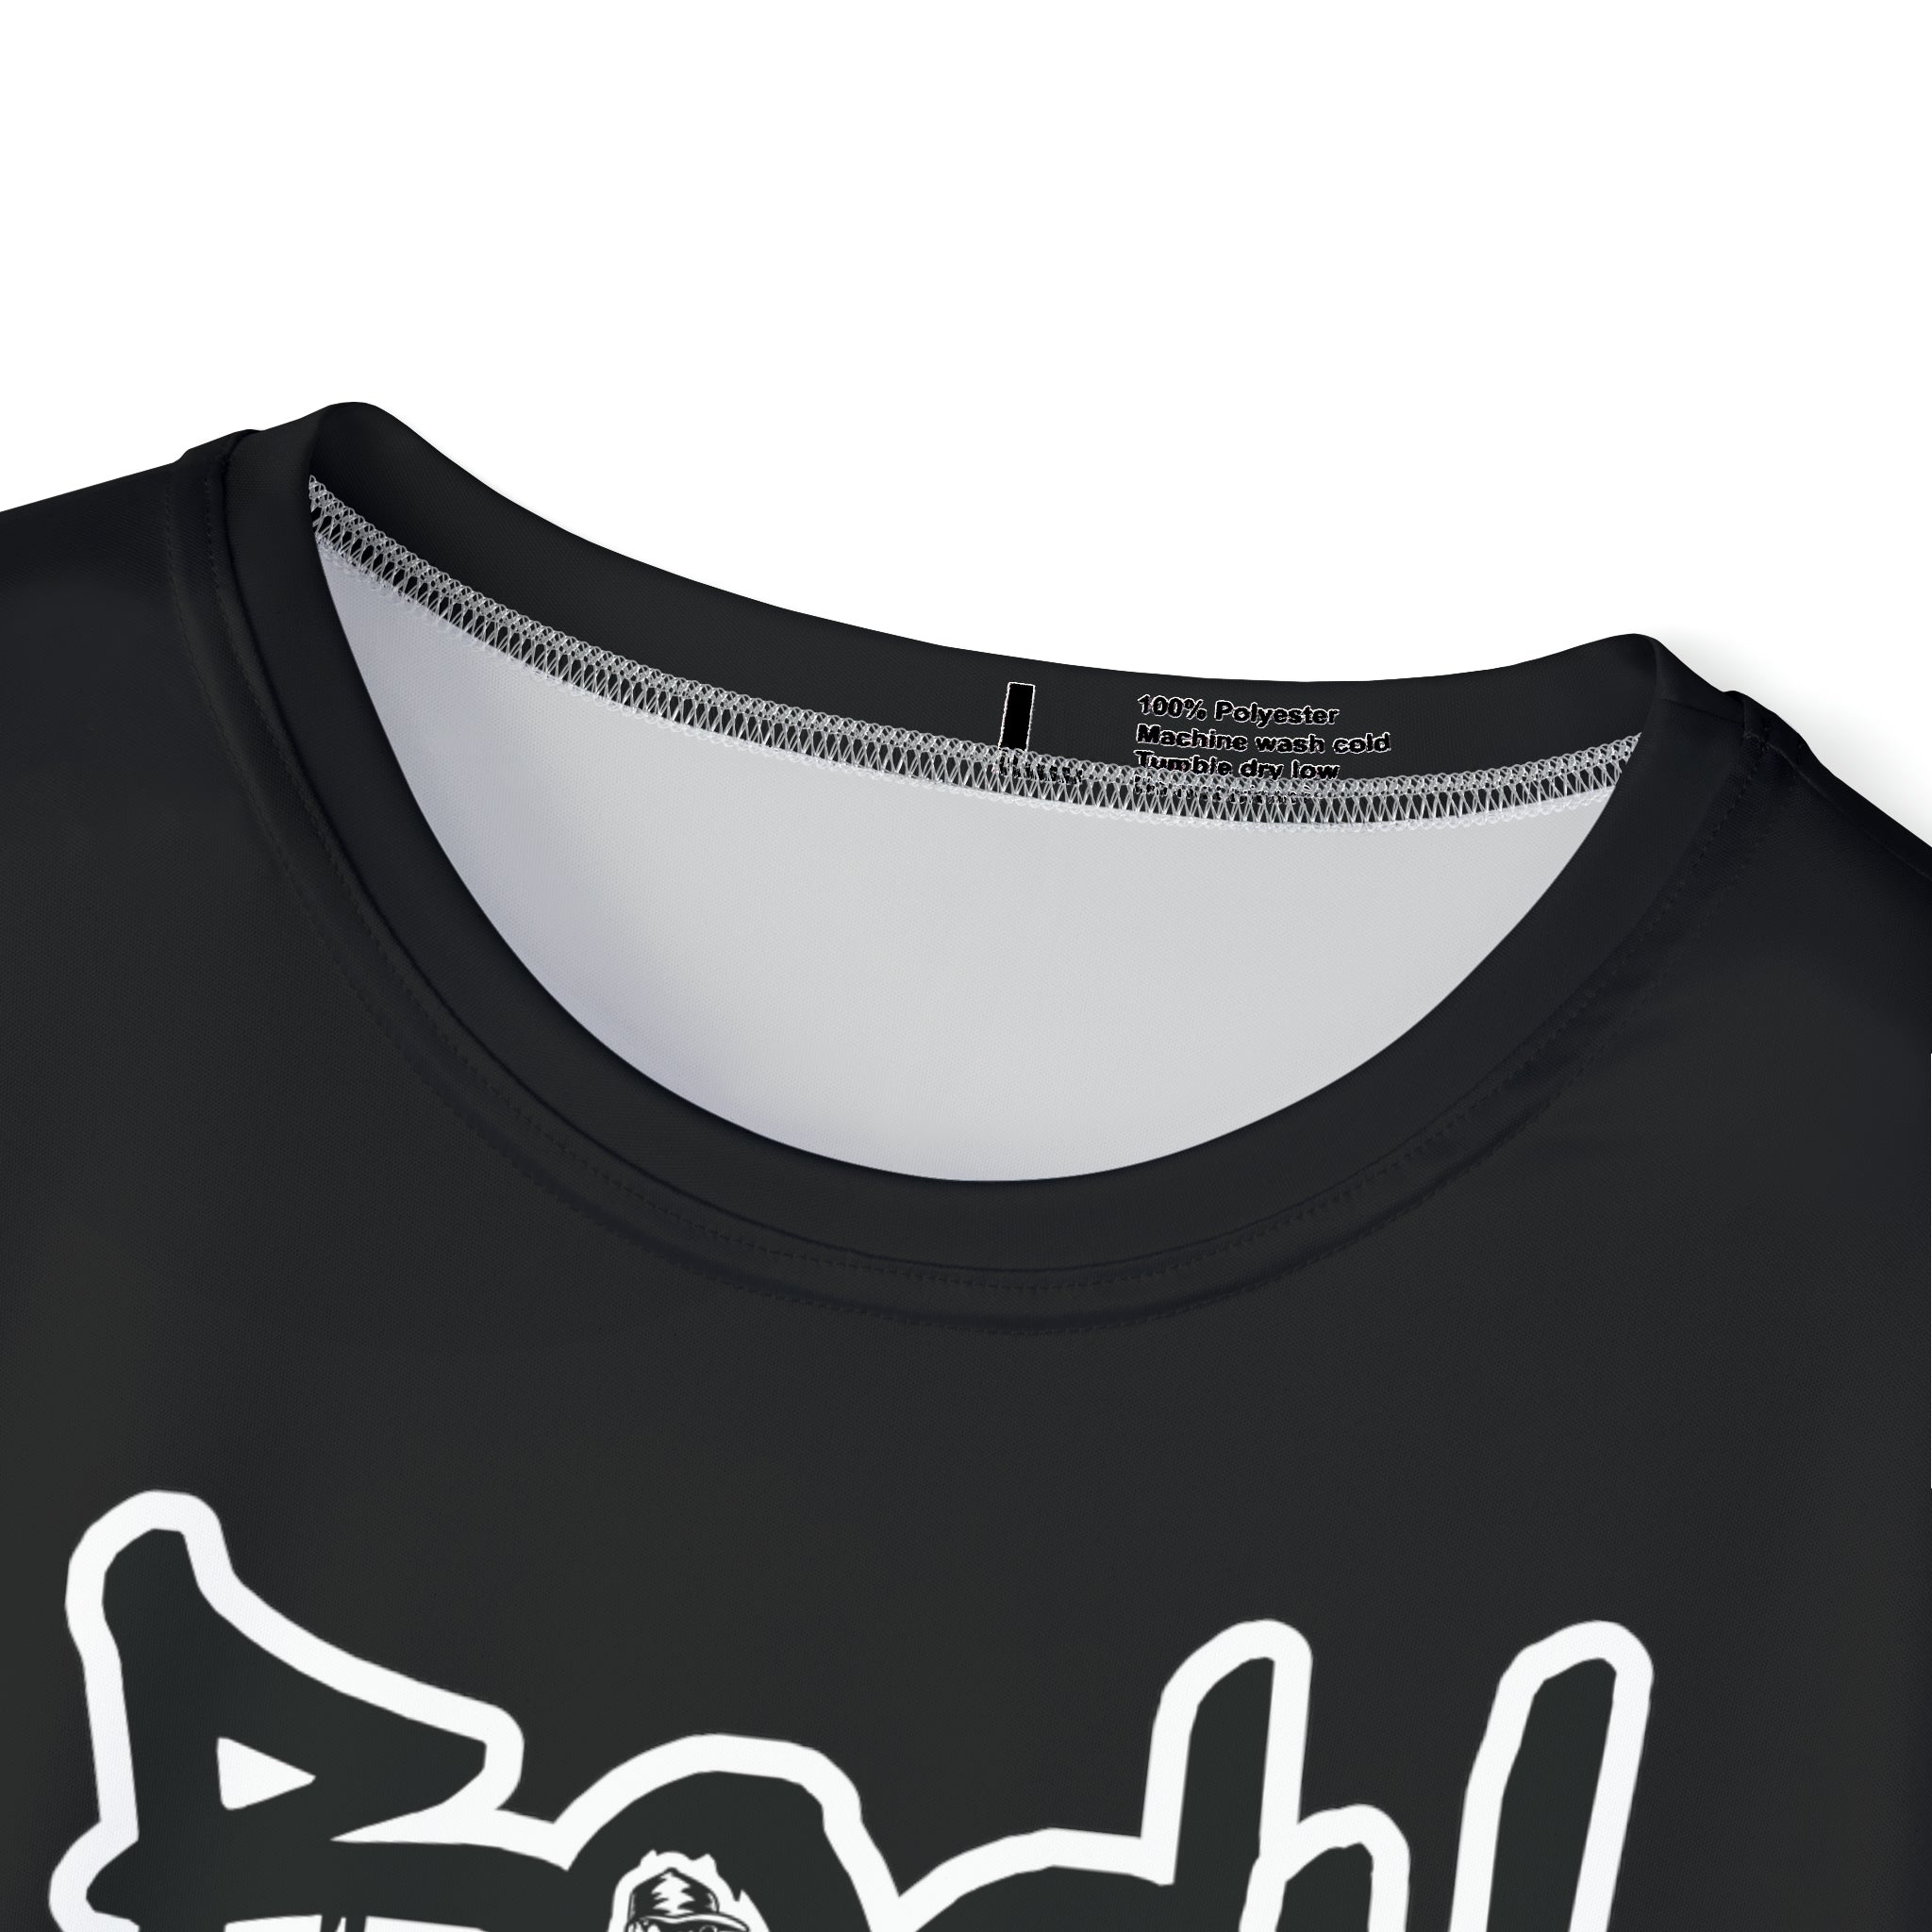 Body Lines - Polyester Black Tee